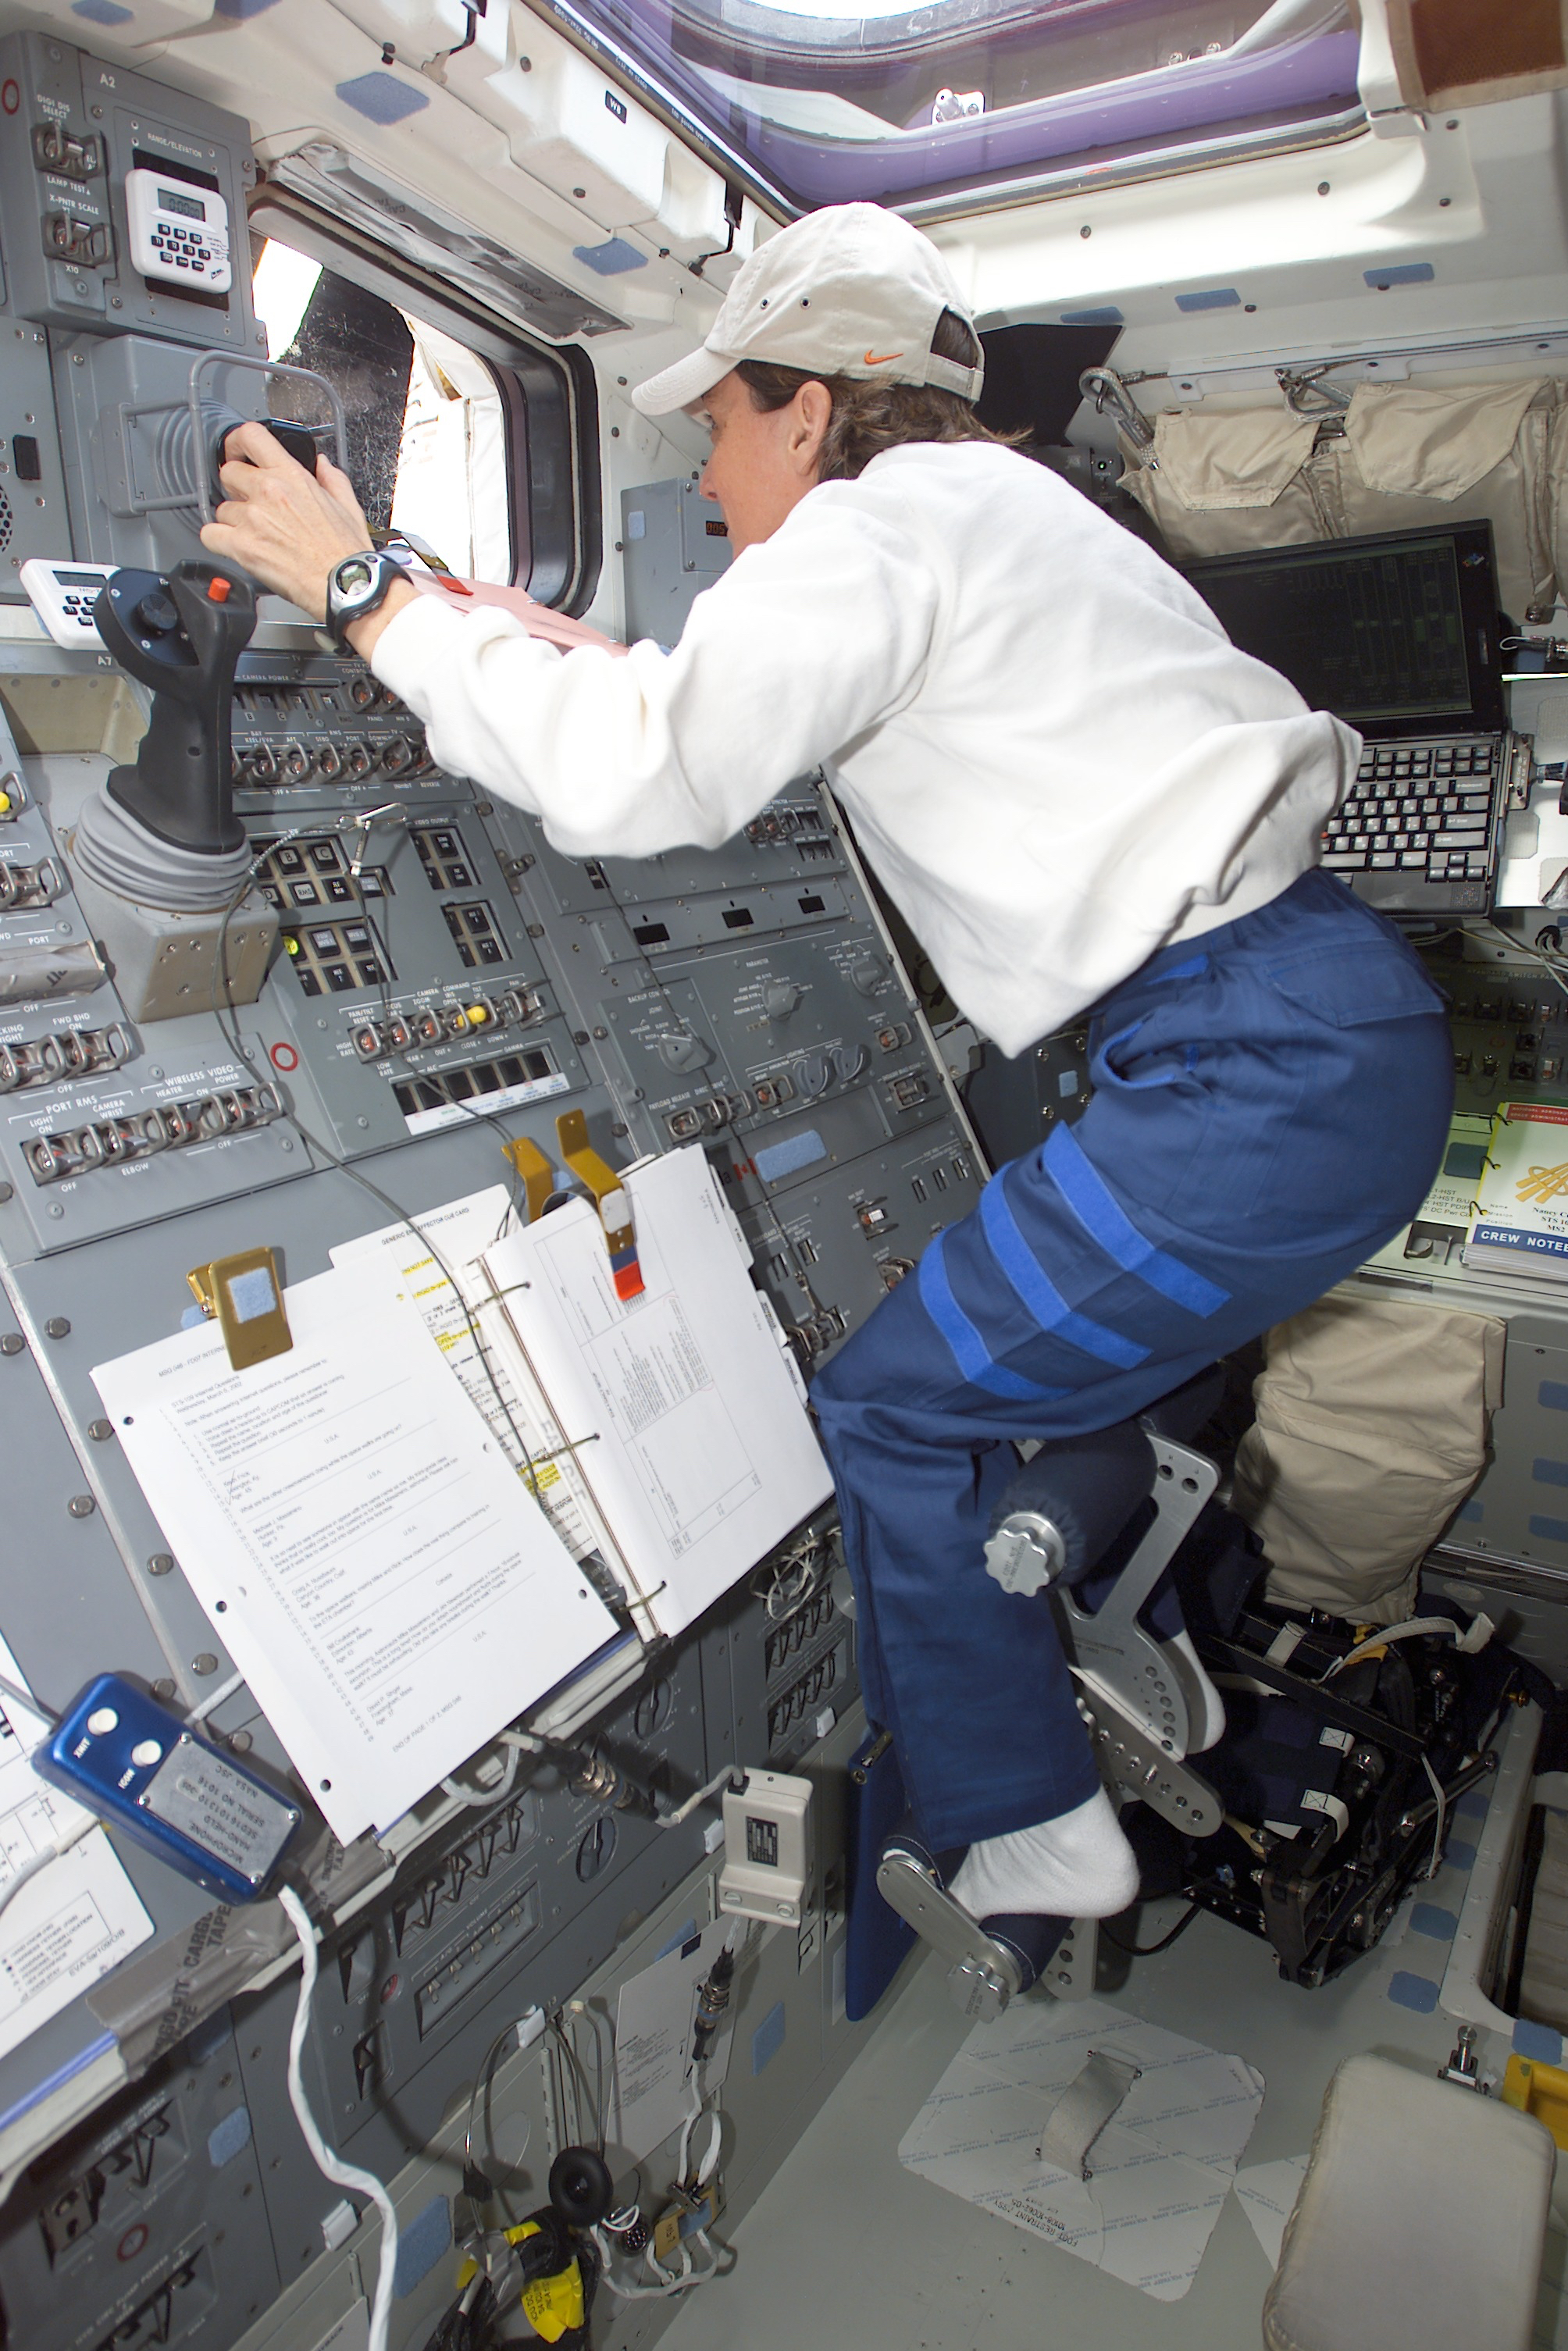 An astronaut floats on the flight deck, her feet anchored, as she works the controls for the robotic arm.